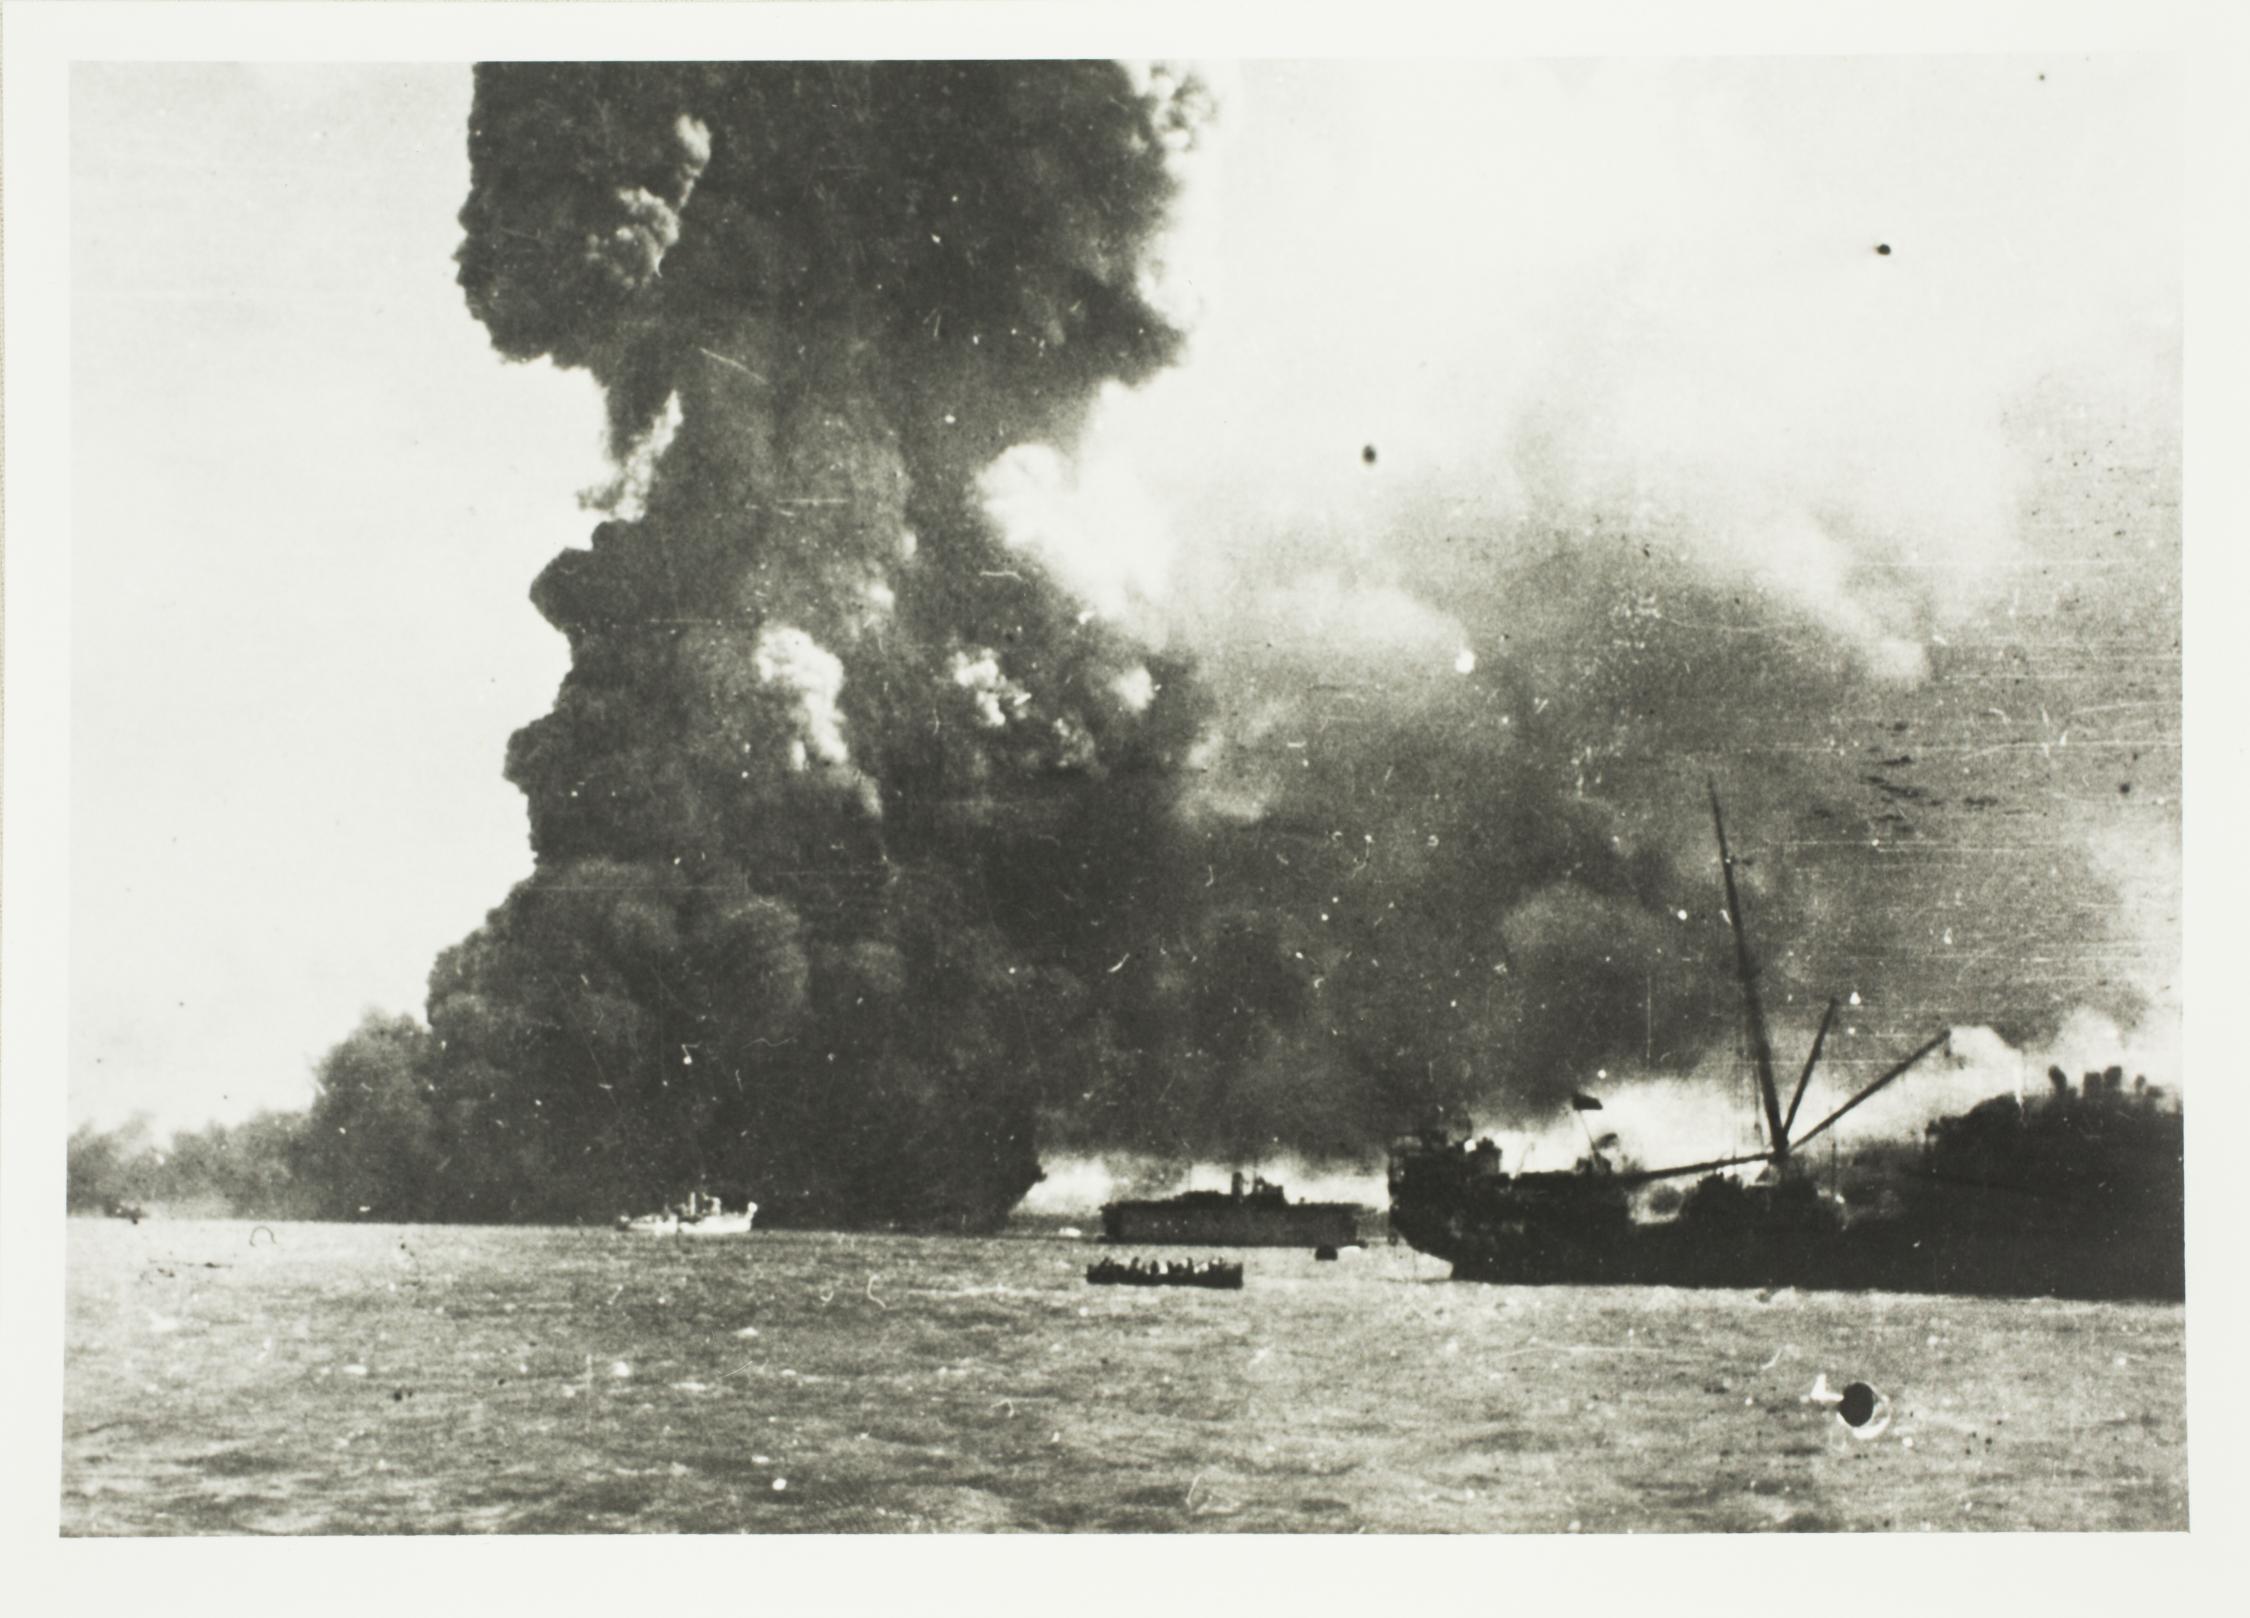 Black smoke rising from bombed ships in Darwin Harbour. 